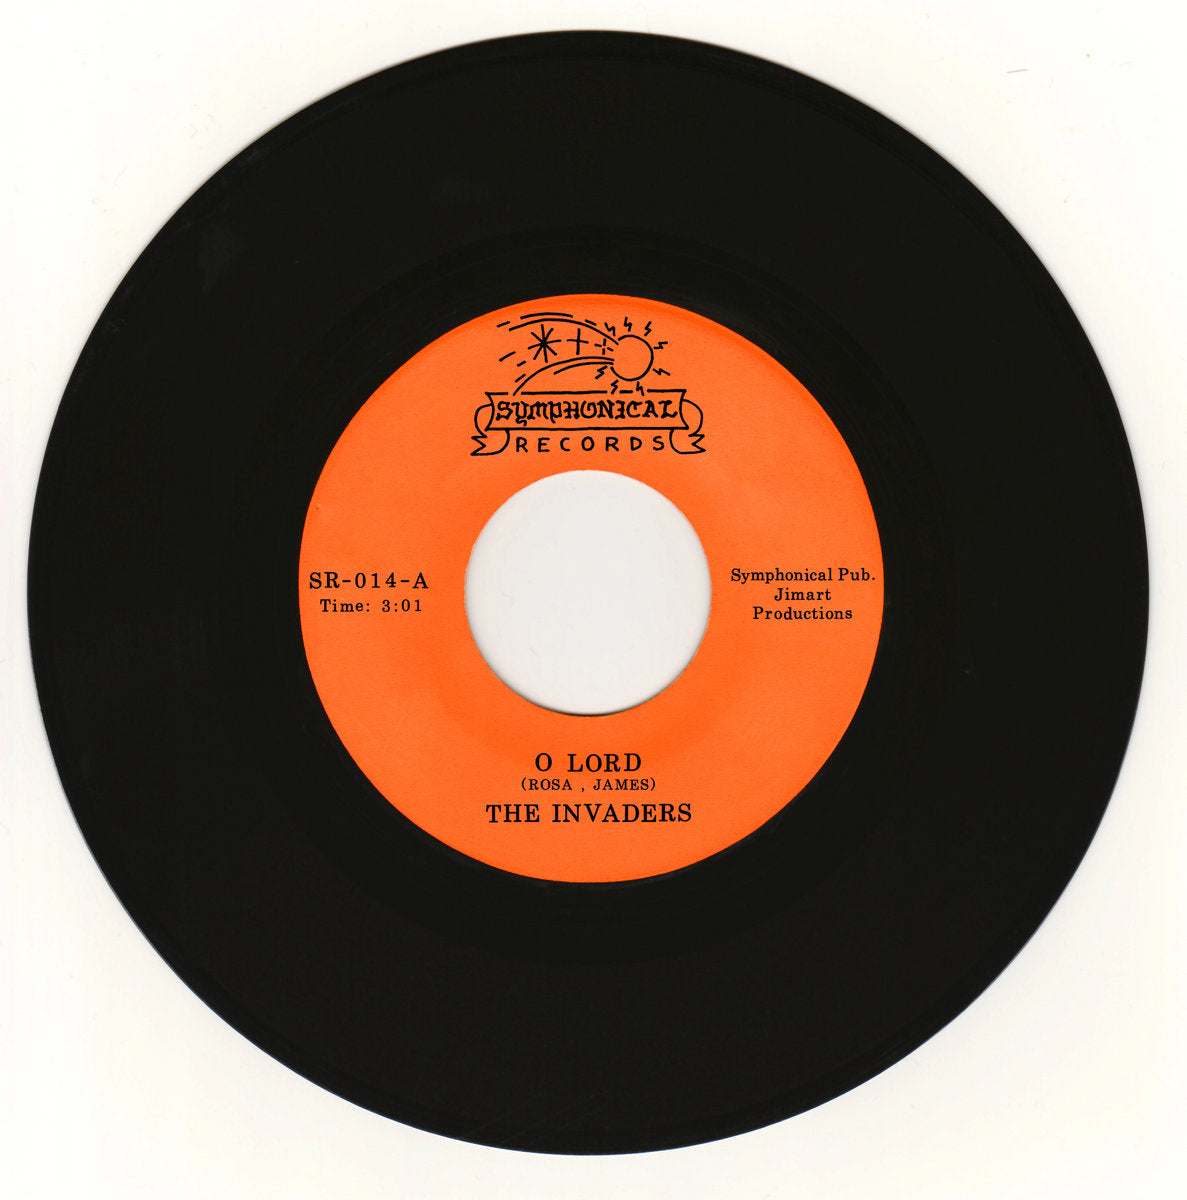 THE INVADERS - O LORD b/w WILDROOTE Vinyl 7"